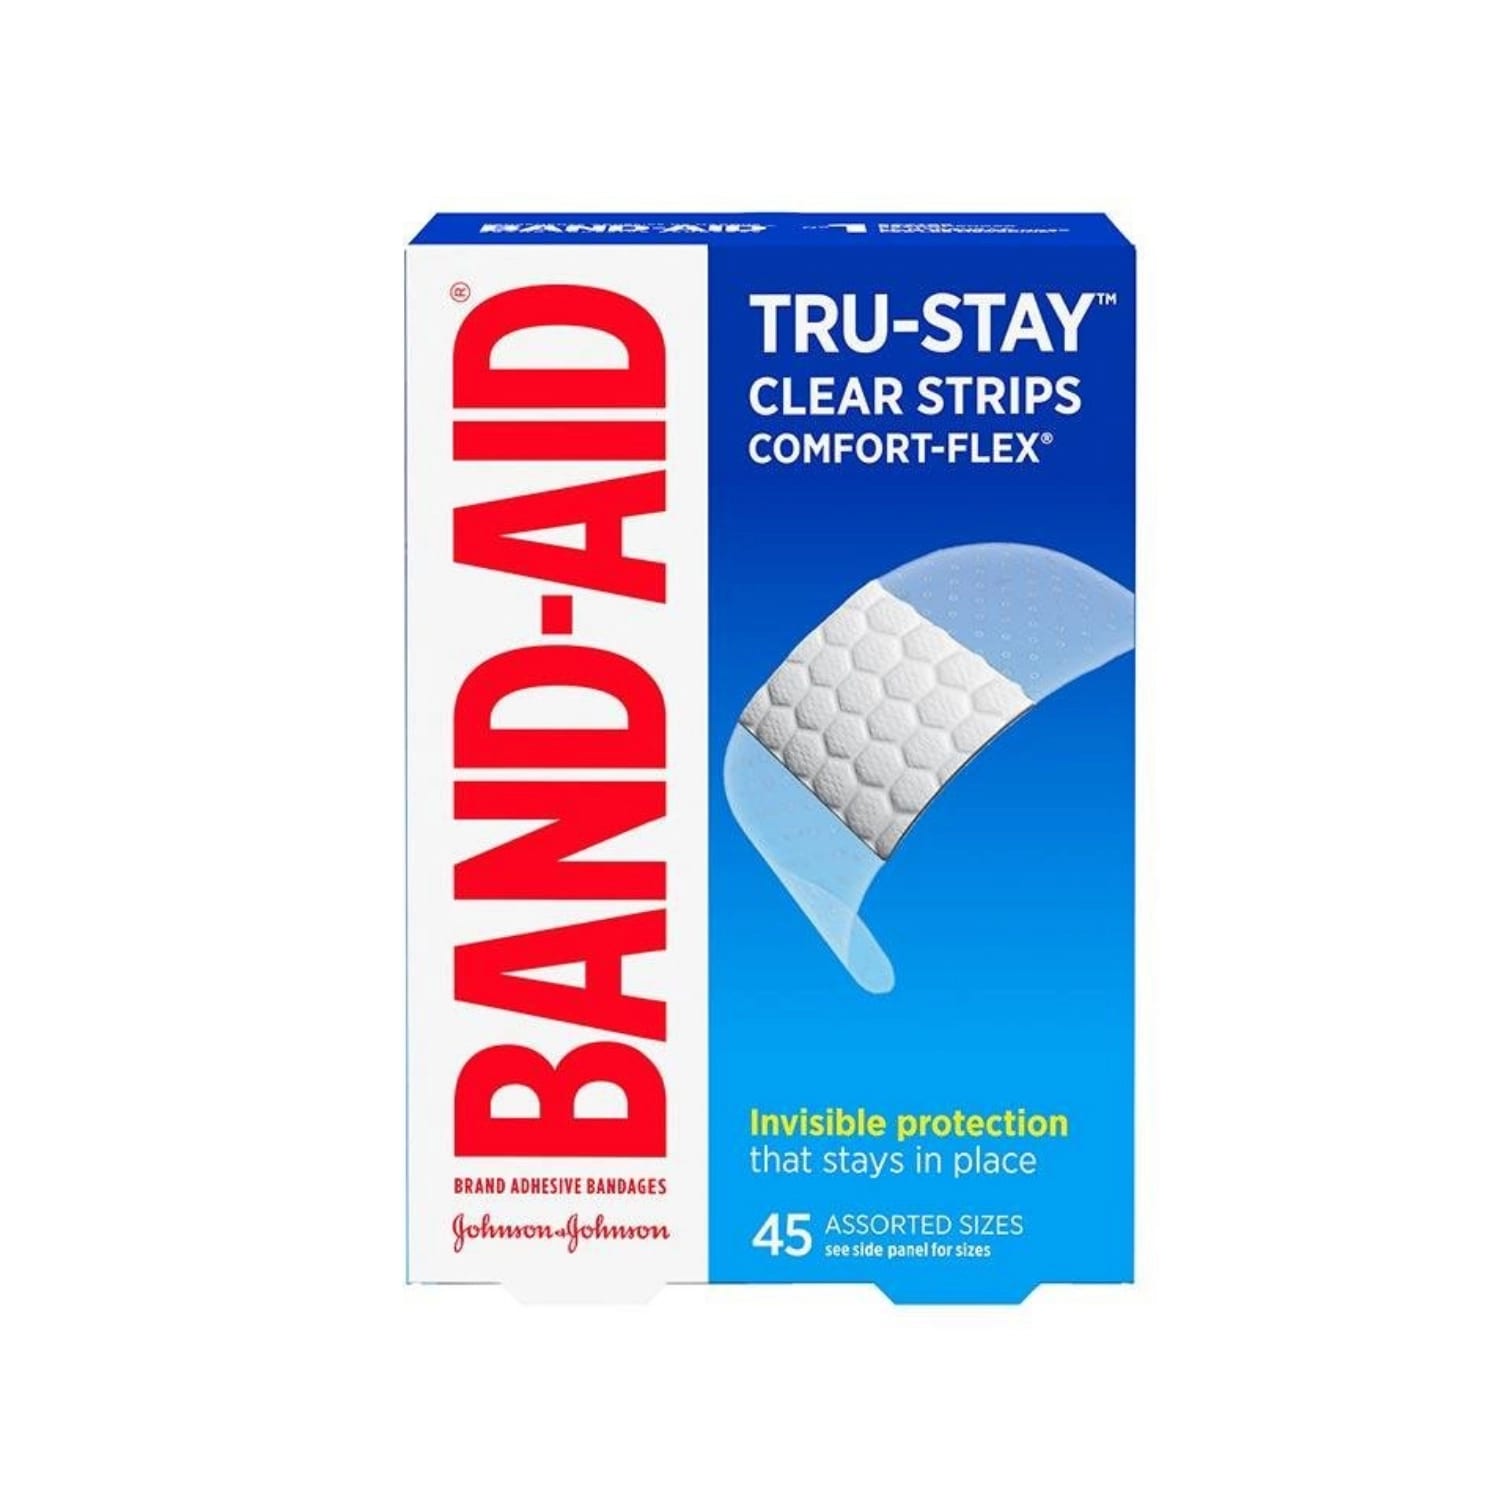 BAND-AID TRU-STAY Clear Strips COMFORT-FLEX Bandages (Assorted